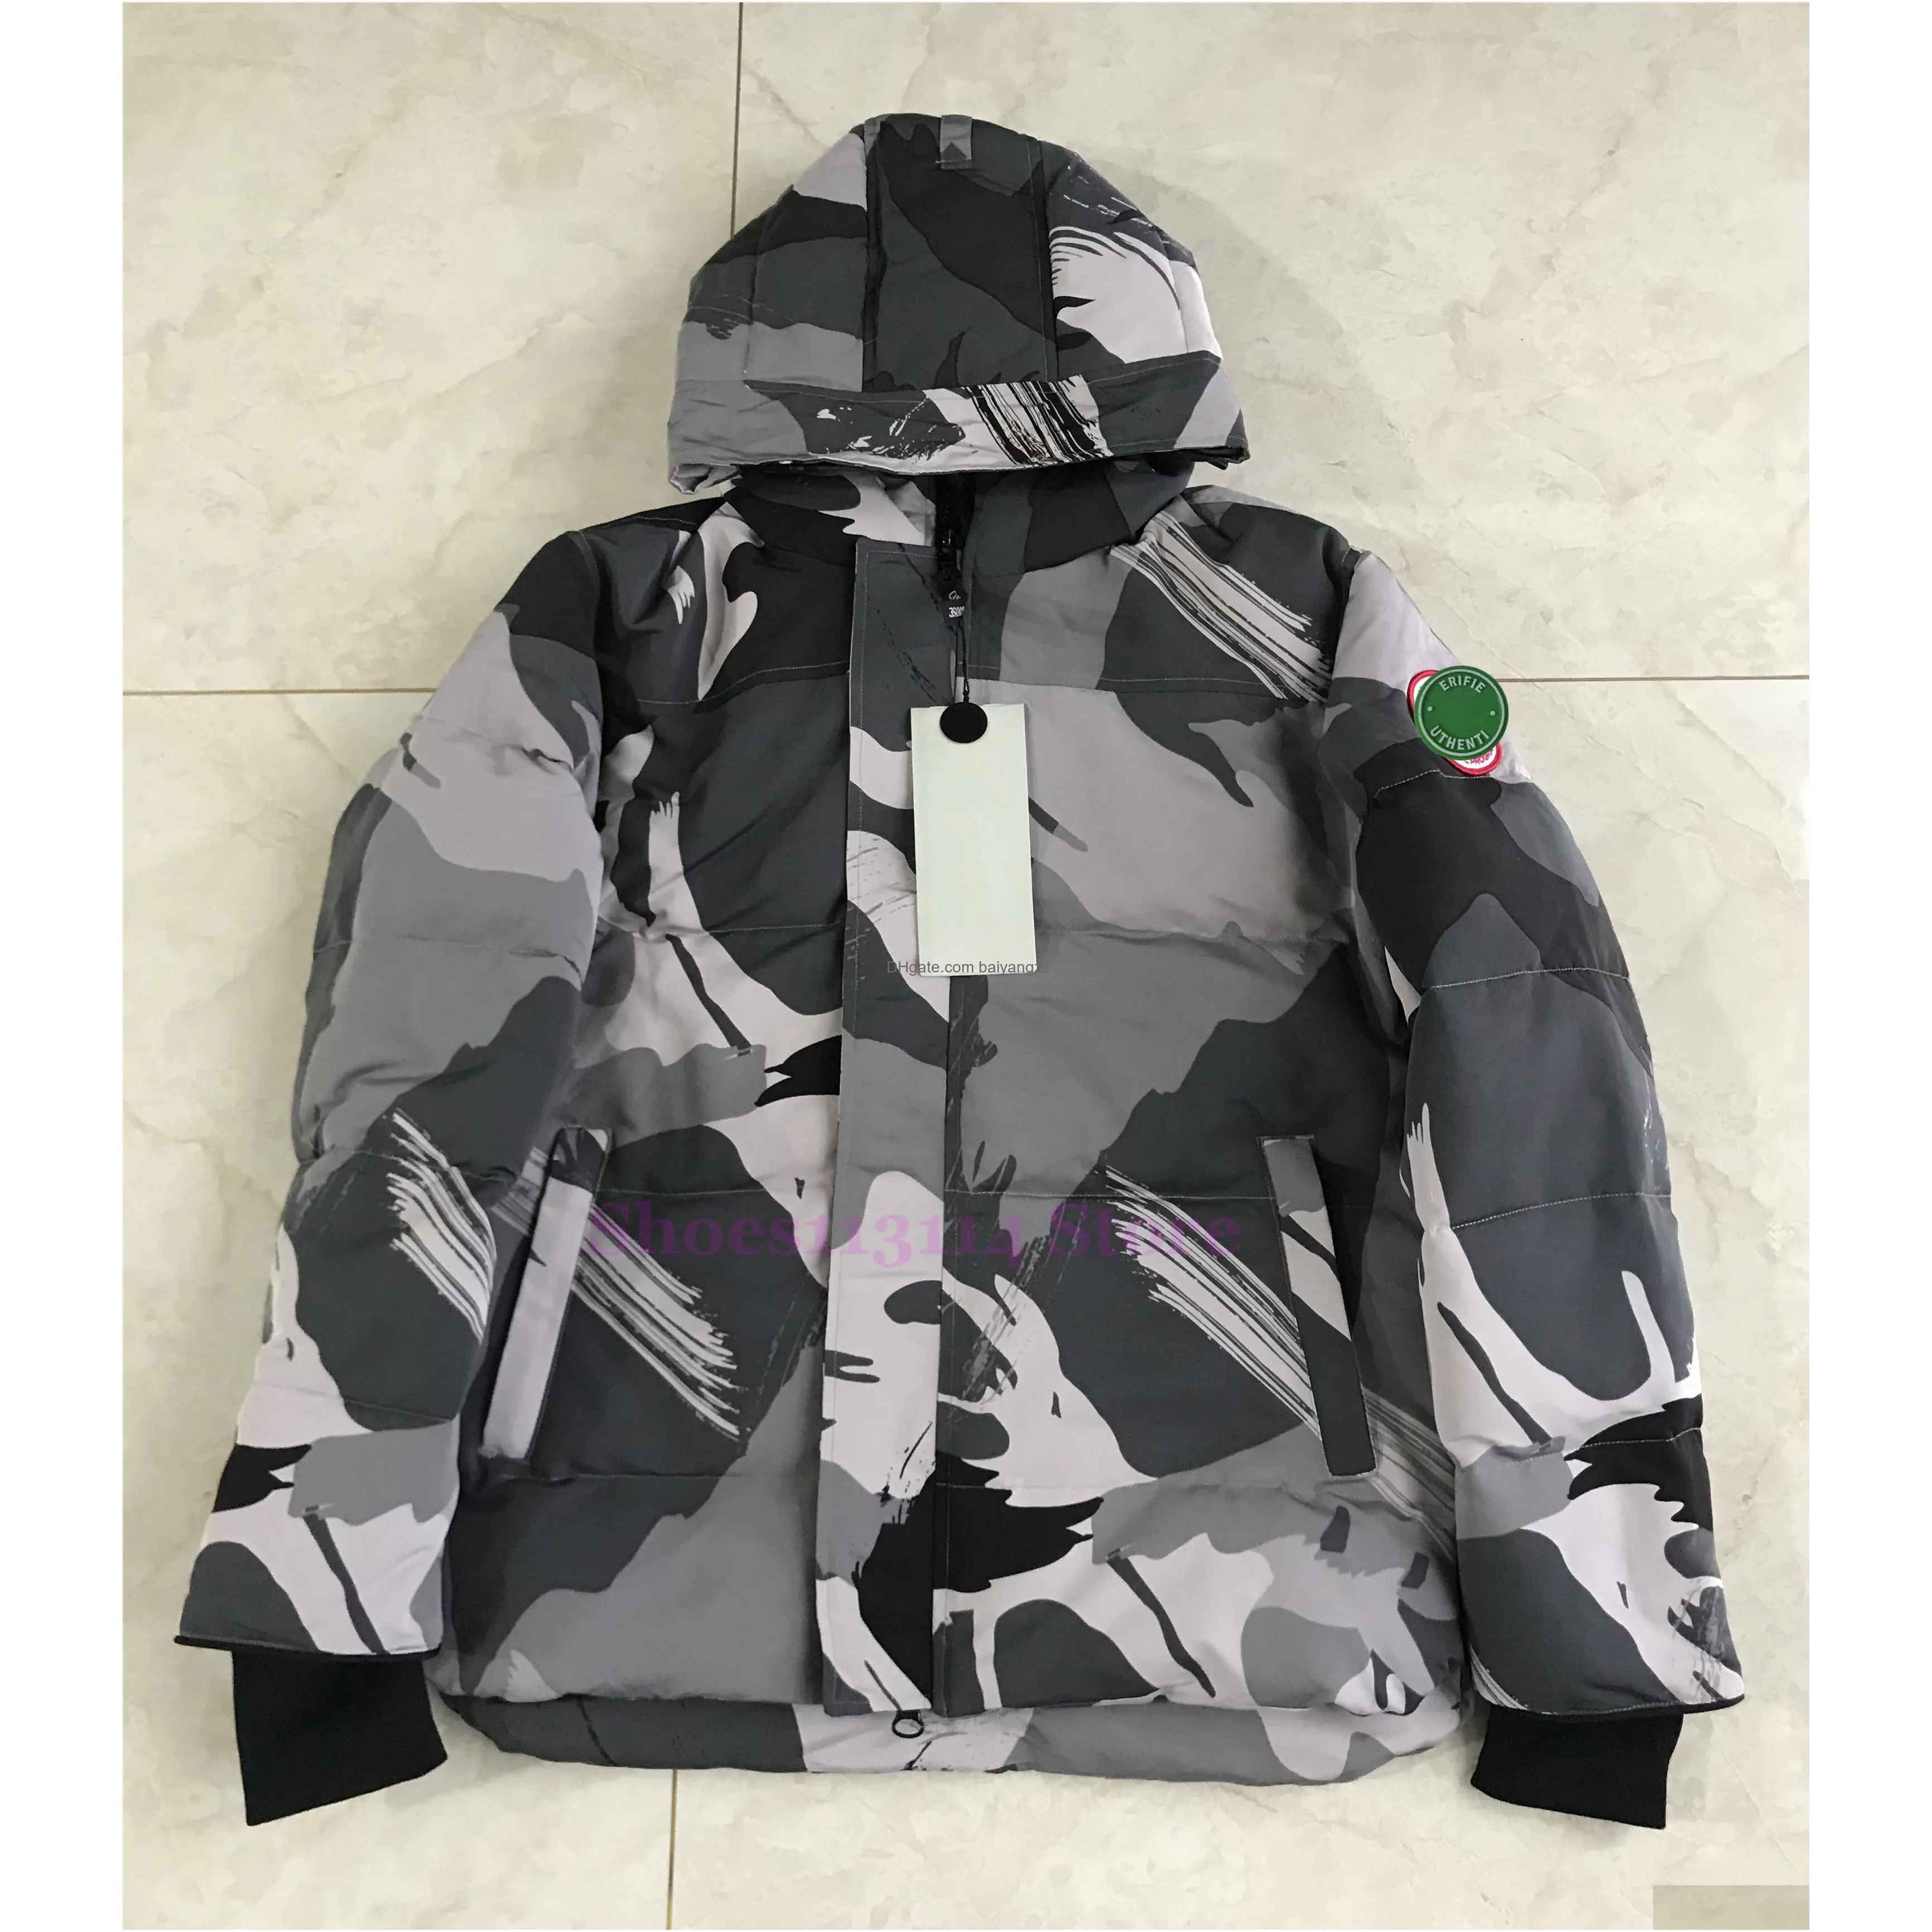 designer winter down jacket canada men women canadian fashion trend hooded parkas goose lovers thickened warmth feather warm luxury outdoor coat jackets